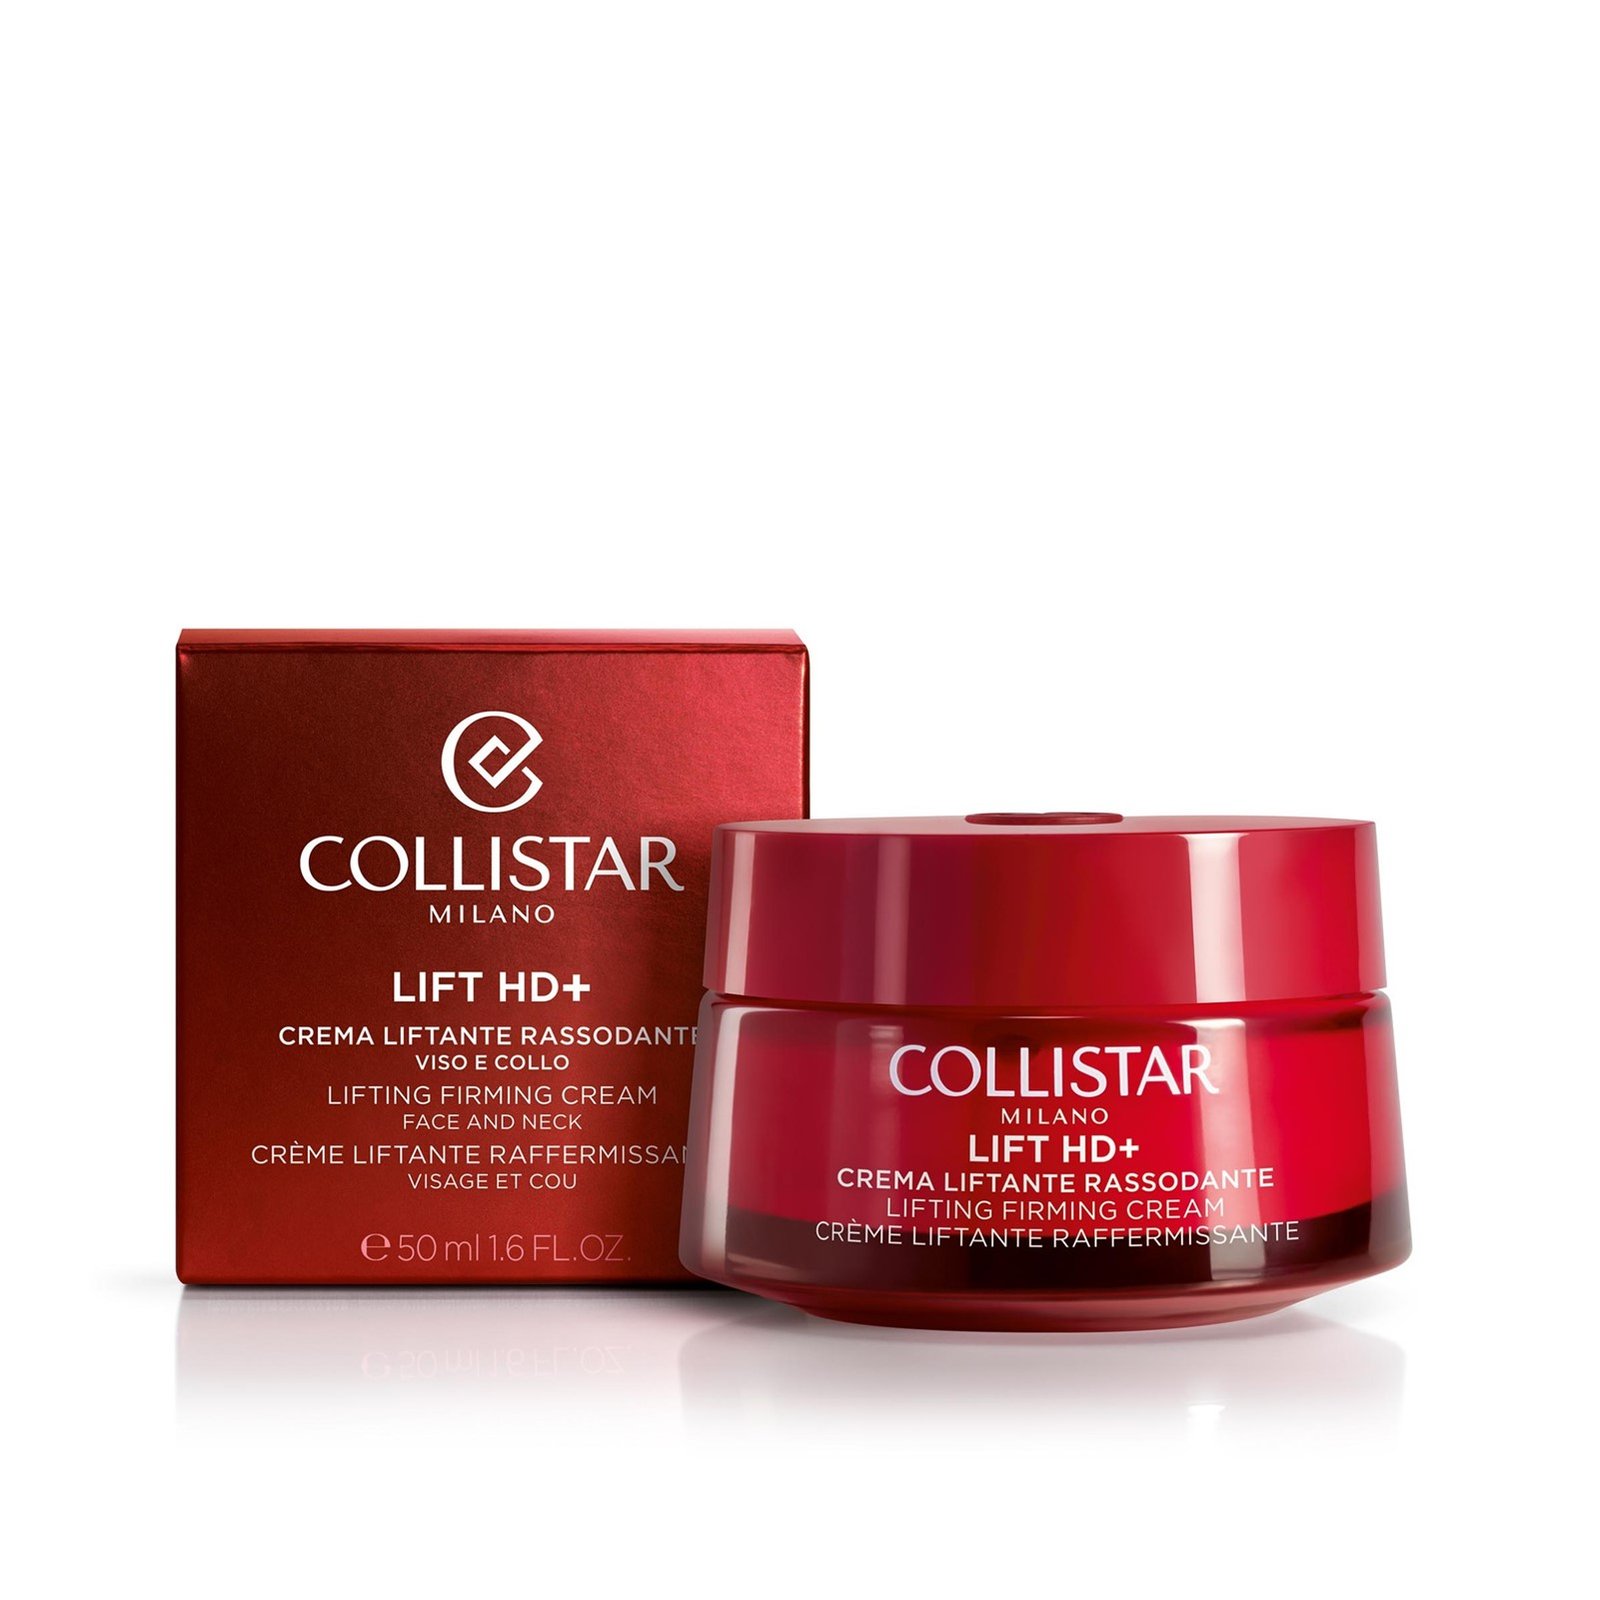 Collistar Lift HD+ Lifting Firming Face And Neck Cream 50ml